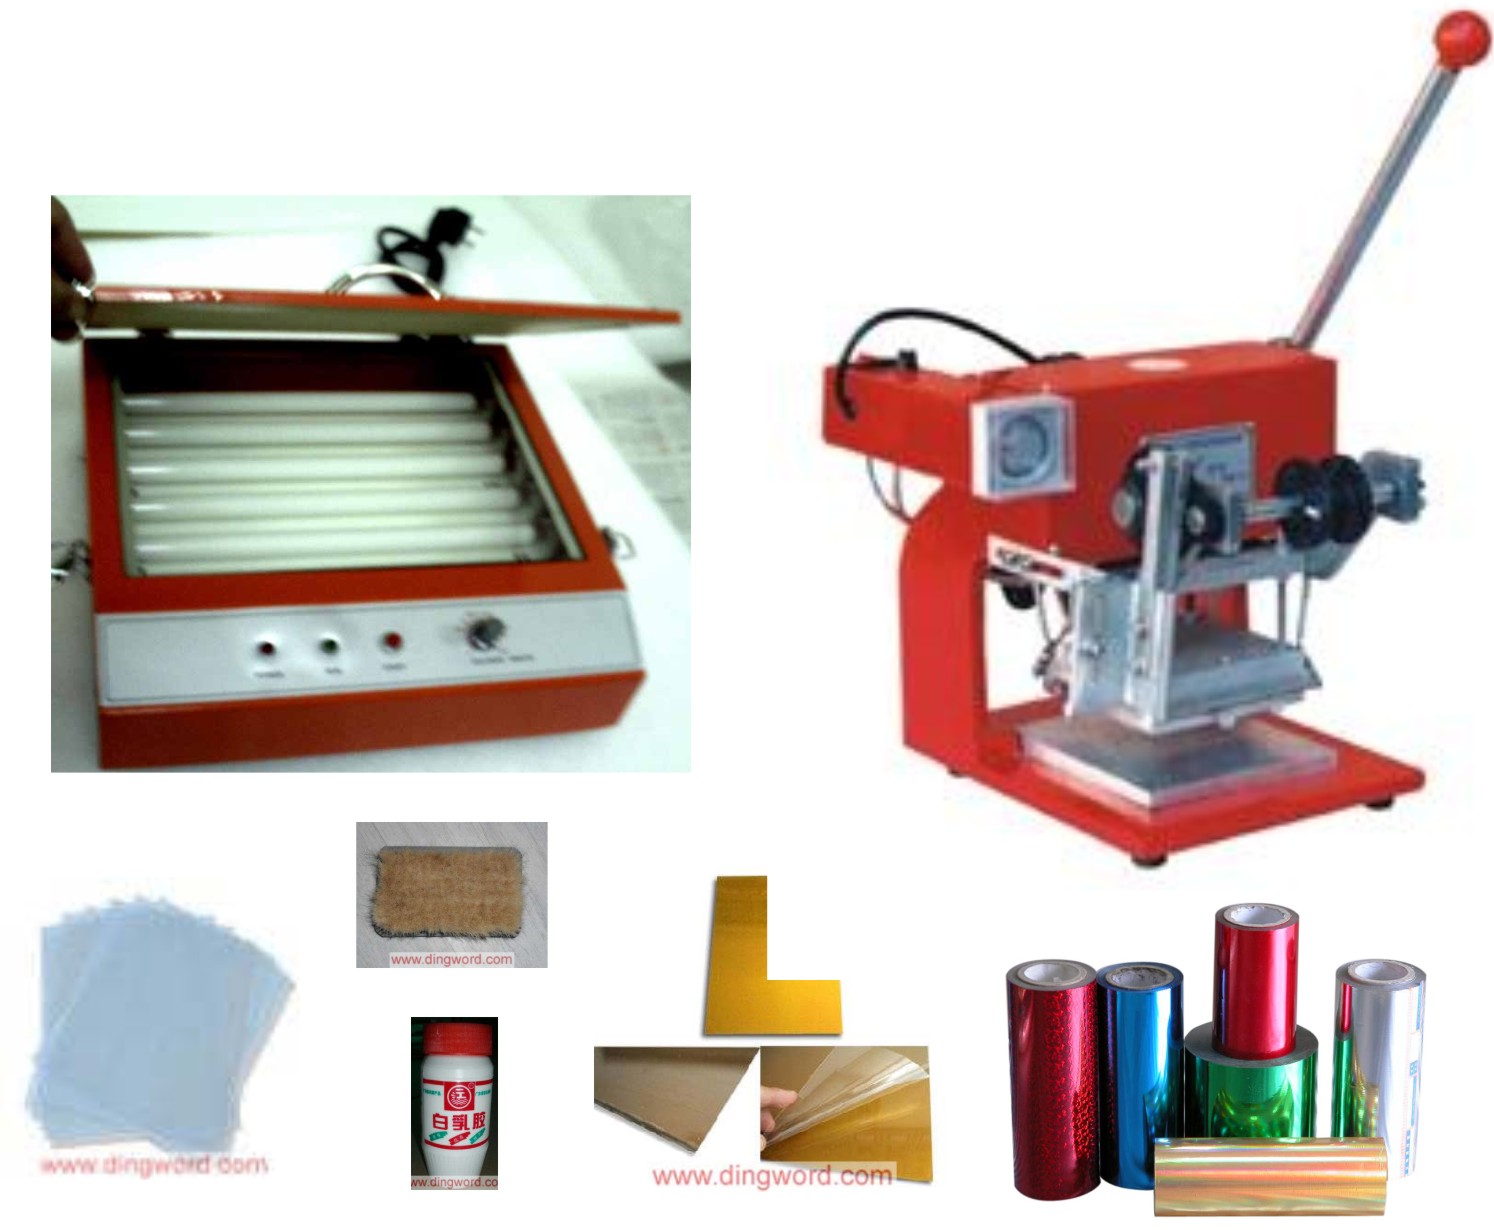 Hot foil stamping machine business start up complete package - Click Image to Close